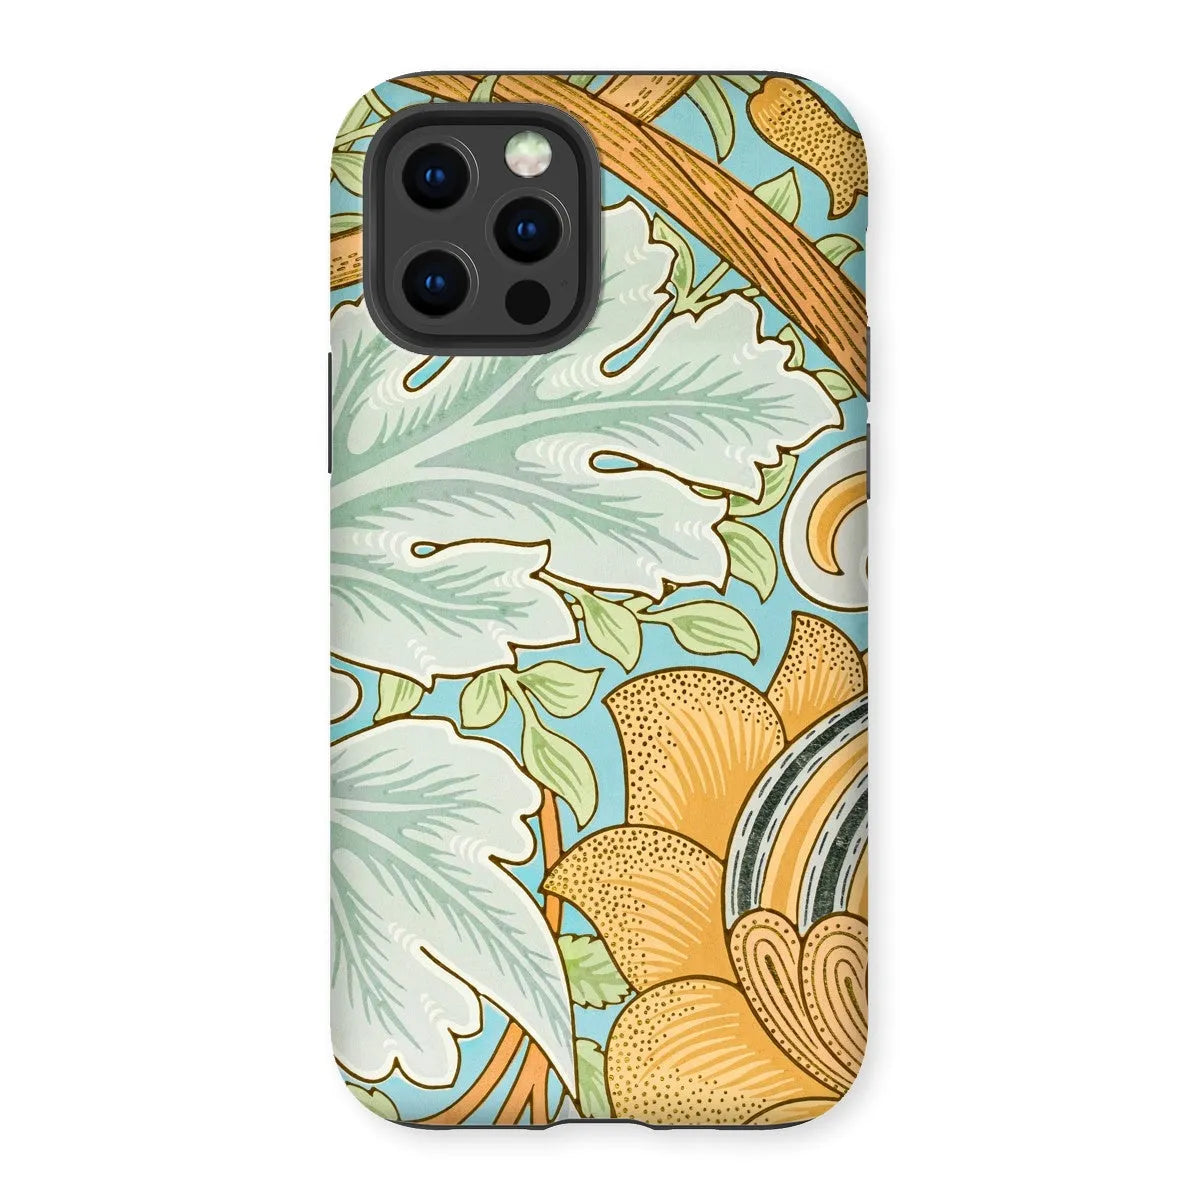 St. James - Arts And Crafts Phone Case - William Morris - Iphone 12 Pro / Matte - Mobile Phone Cases - Aesthetic Art